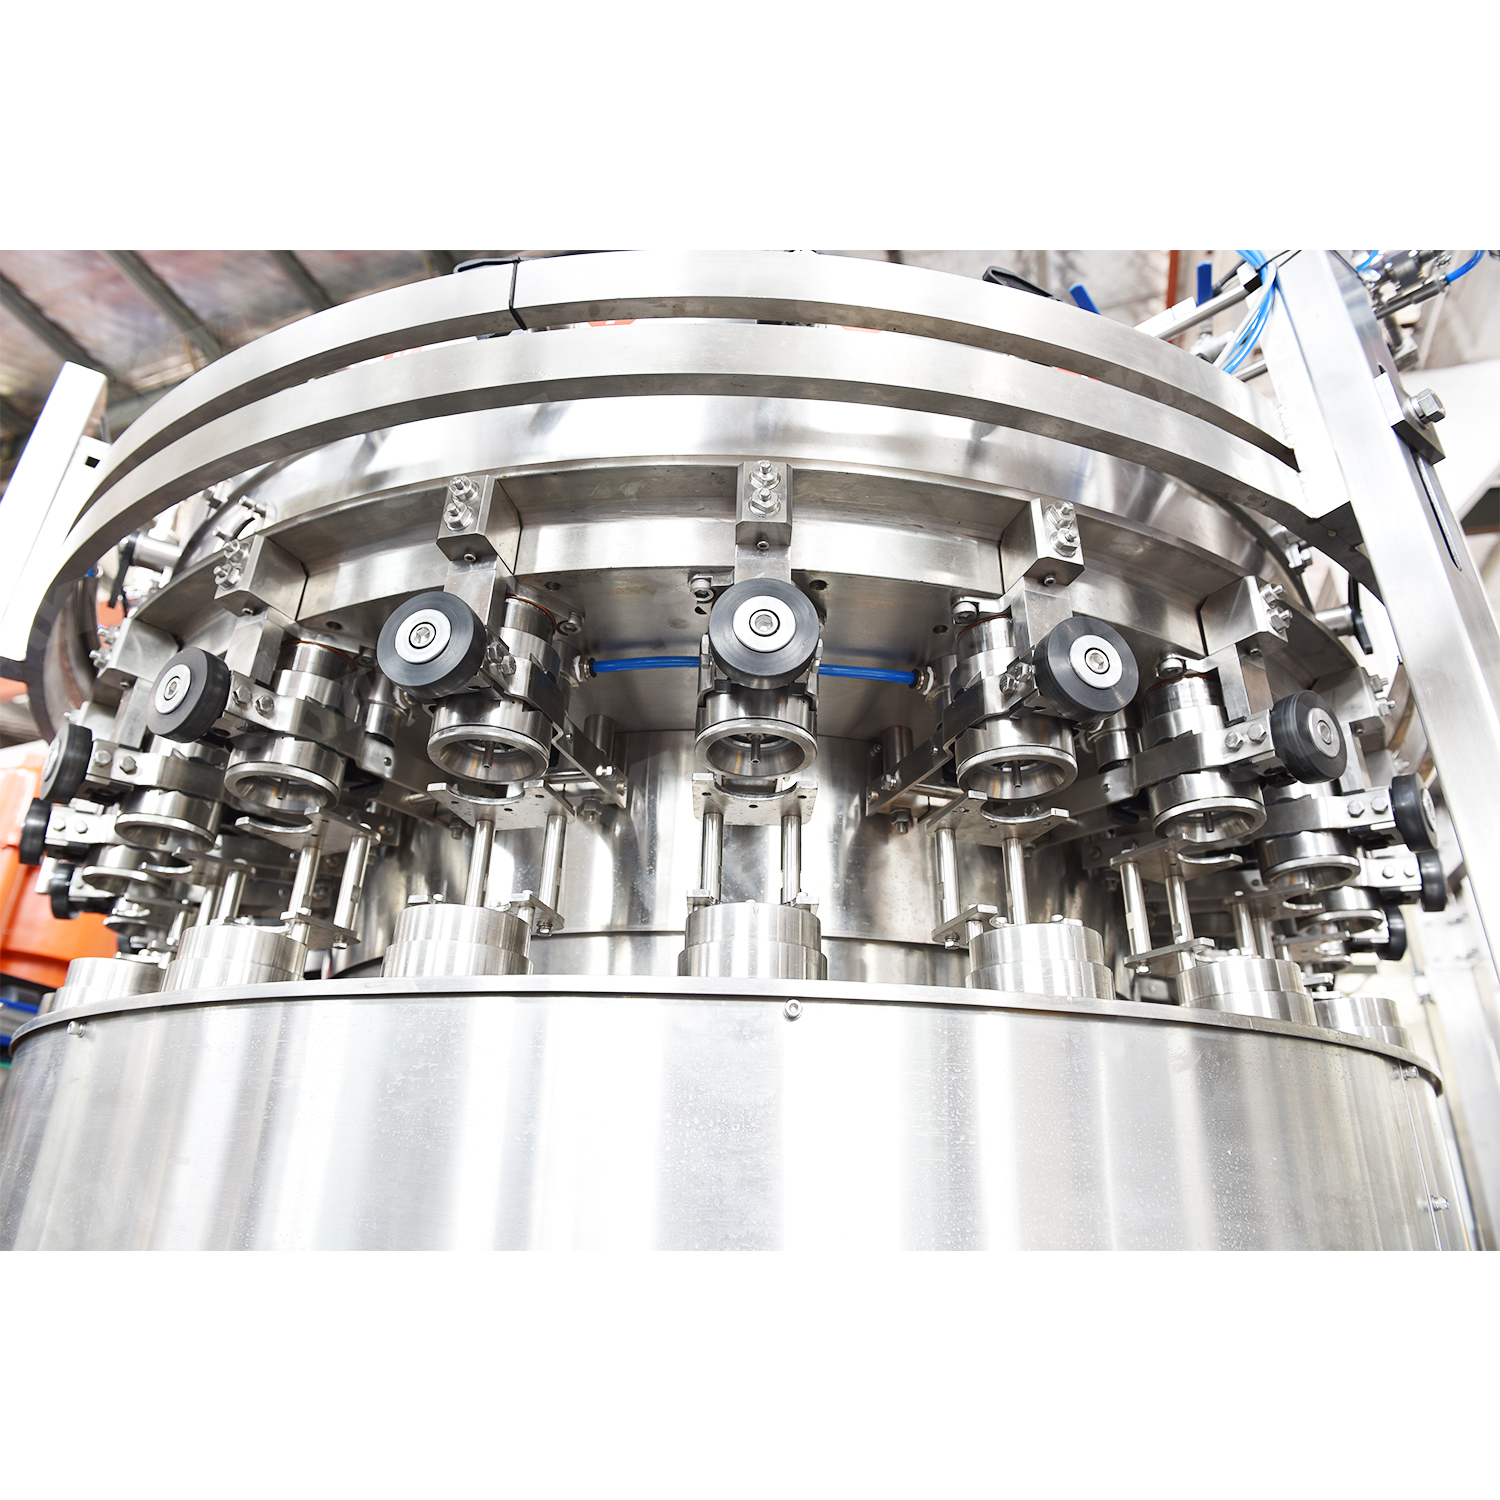 Aluminum Can Soft Drink Canning Production Line